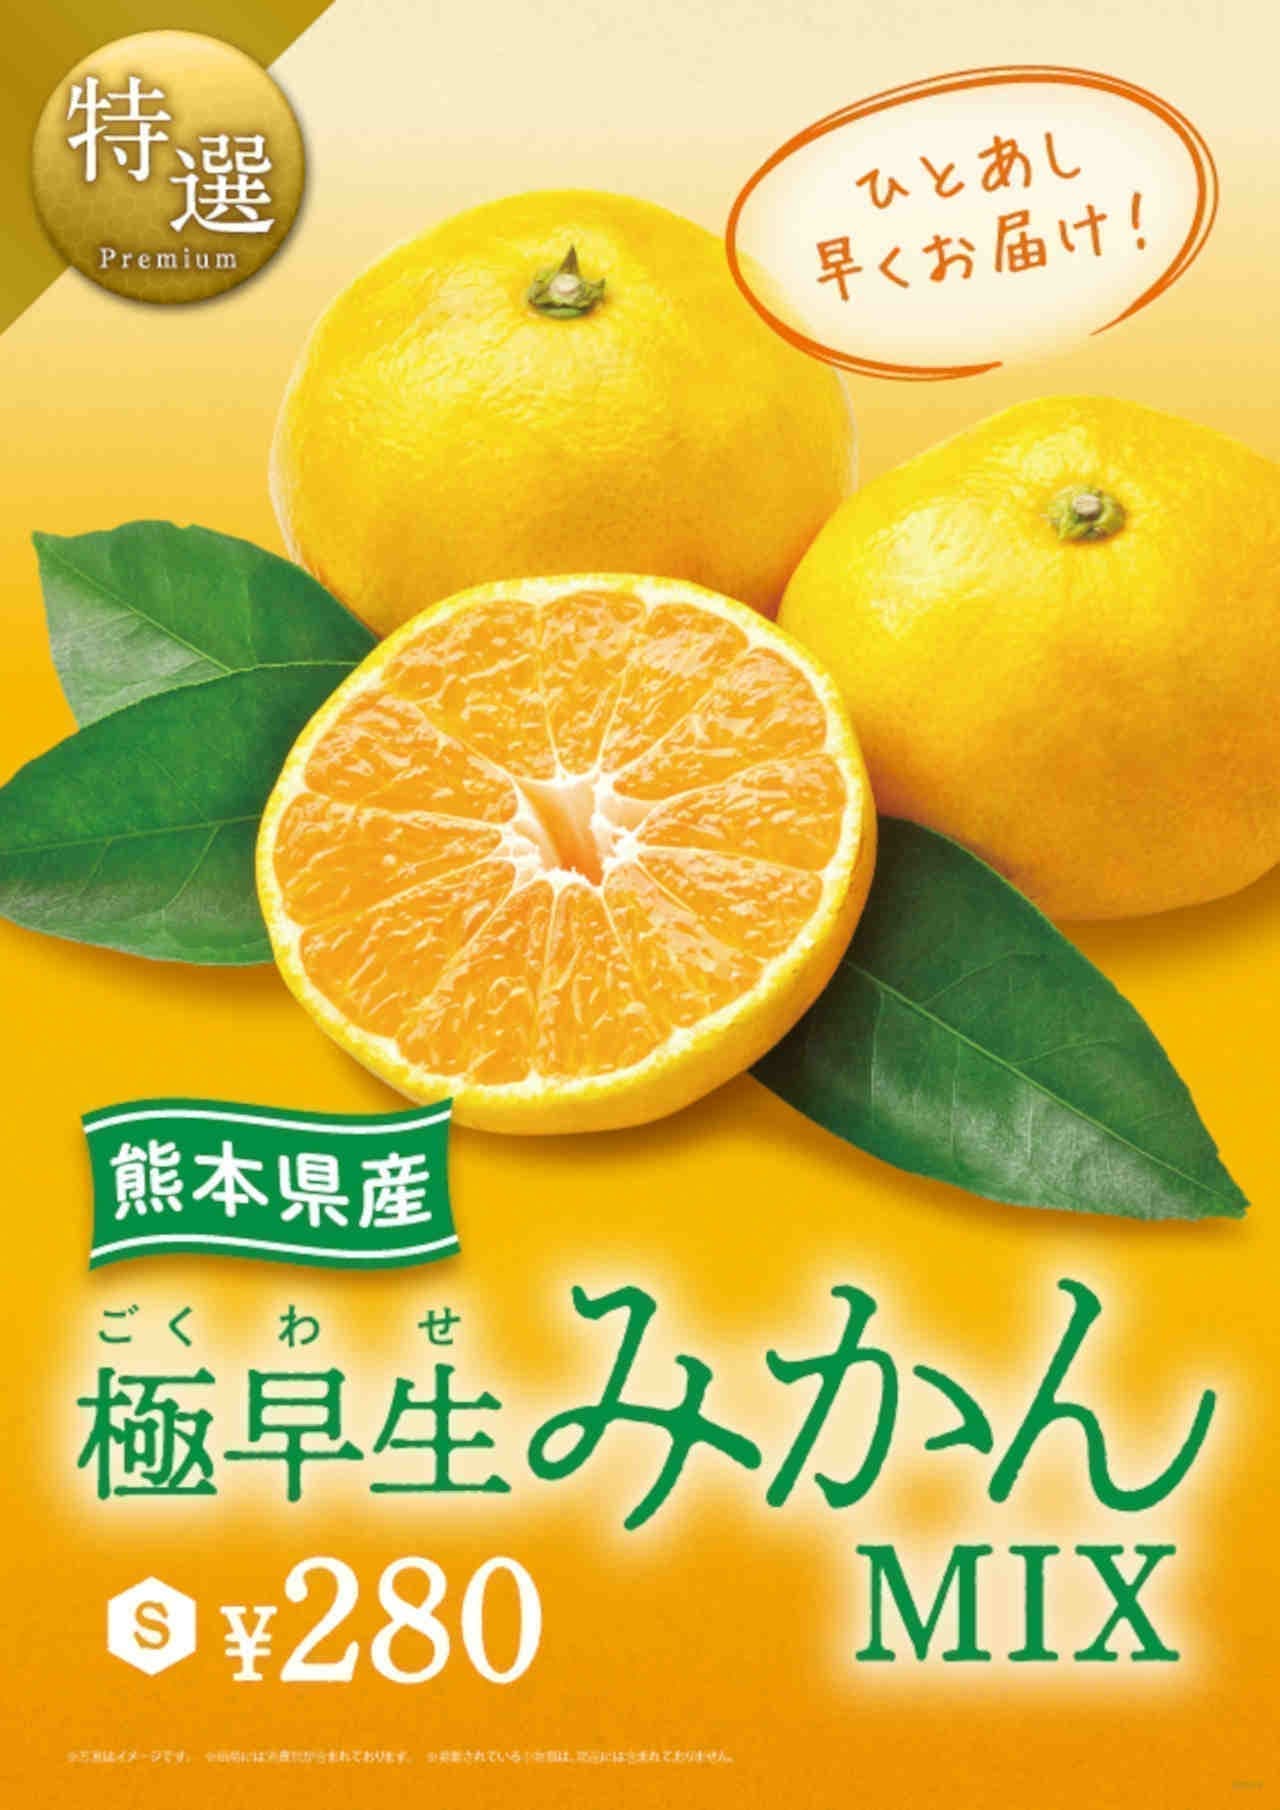 HONEY'S Bar is now offering "Specially Selected Pioneer Yogurt from Okayama Prefecture" and "Specially Selected Ultra-Hearty Mikan Mix from Kumamoto Prefecture"!